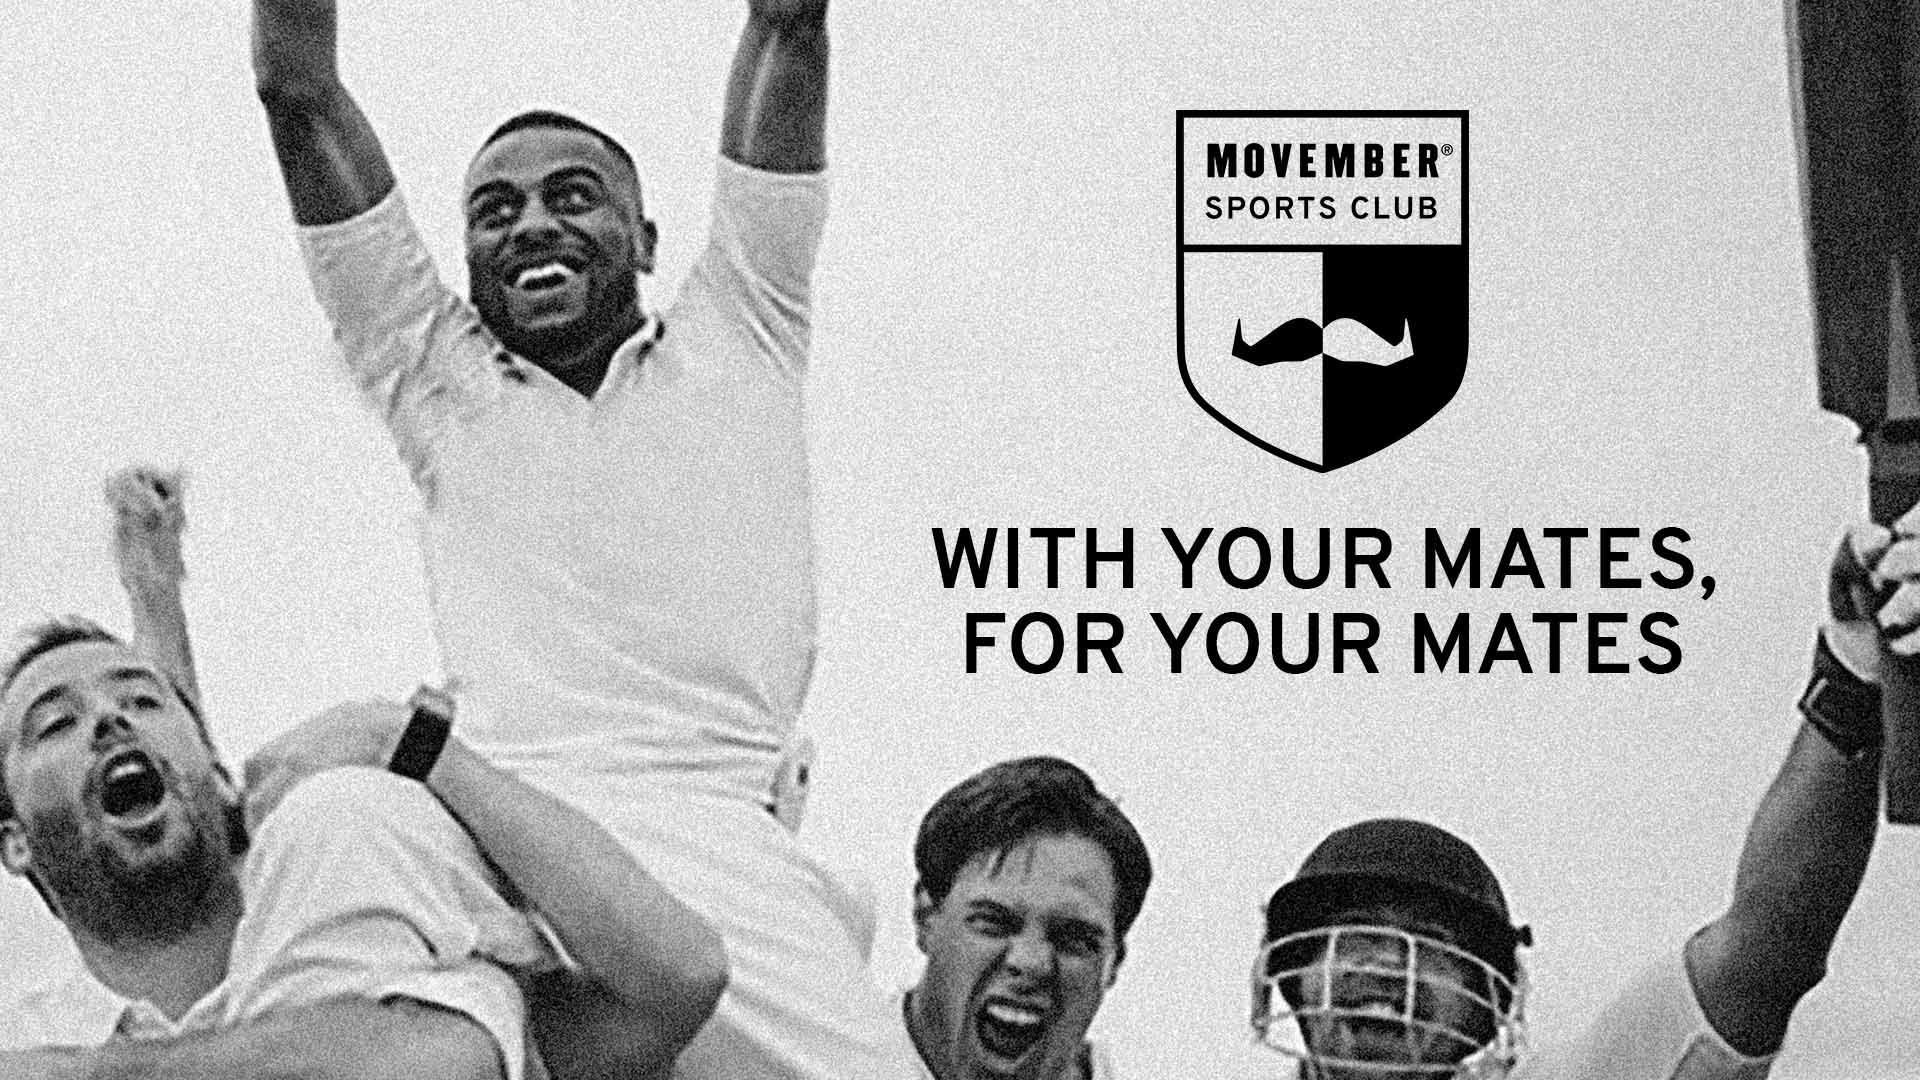 Victorious cricketers celebrating with their arms aloft. A Movember Sports Club logo on a shield surmounts the photo.